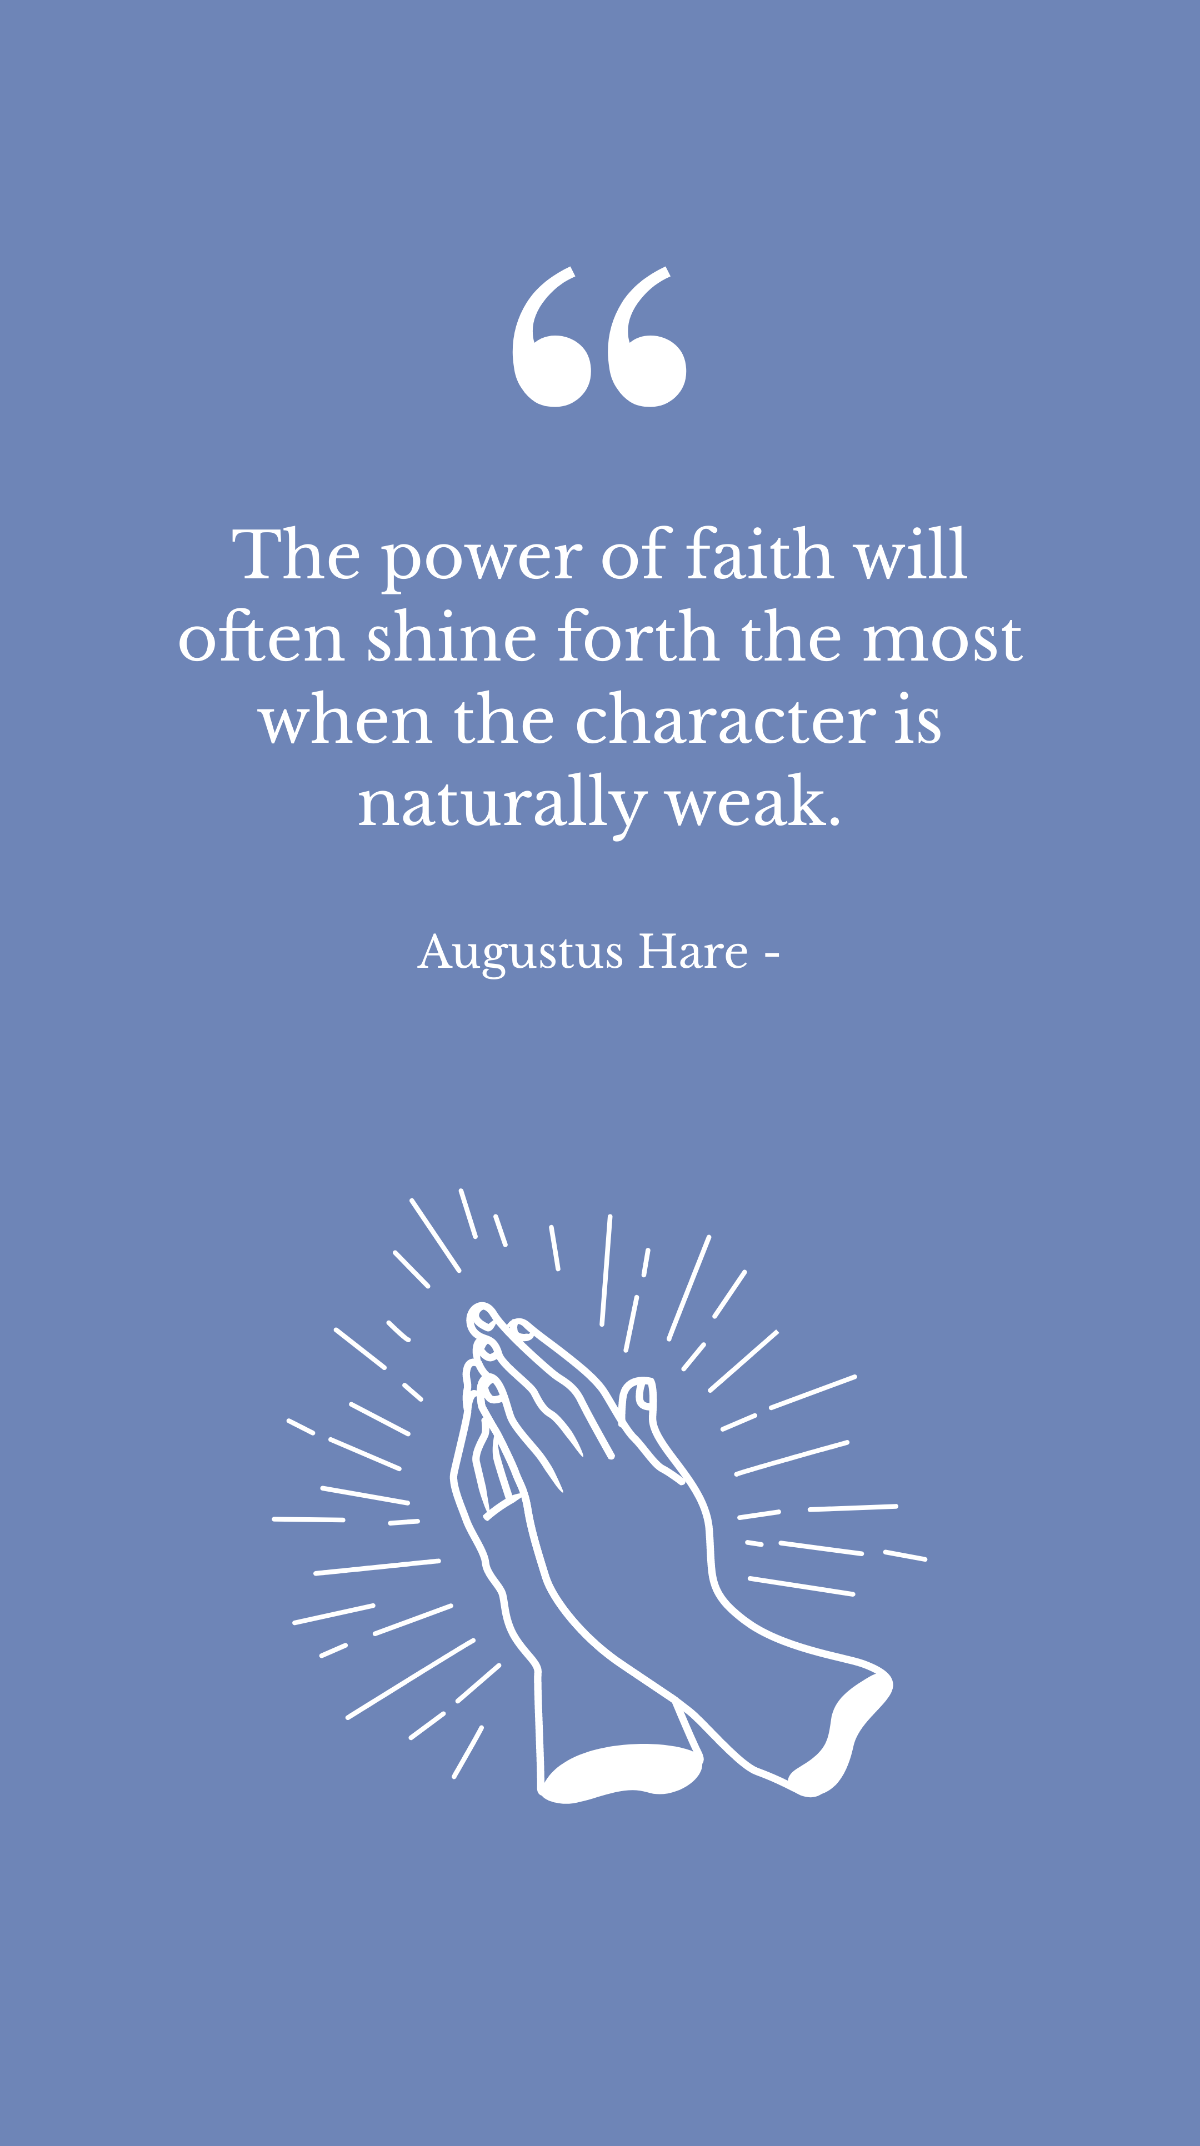 Augustus Hare - The power of faith will often shine forth the most when the character is naturally weak. Template